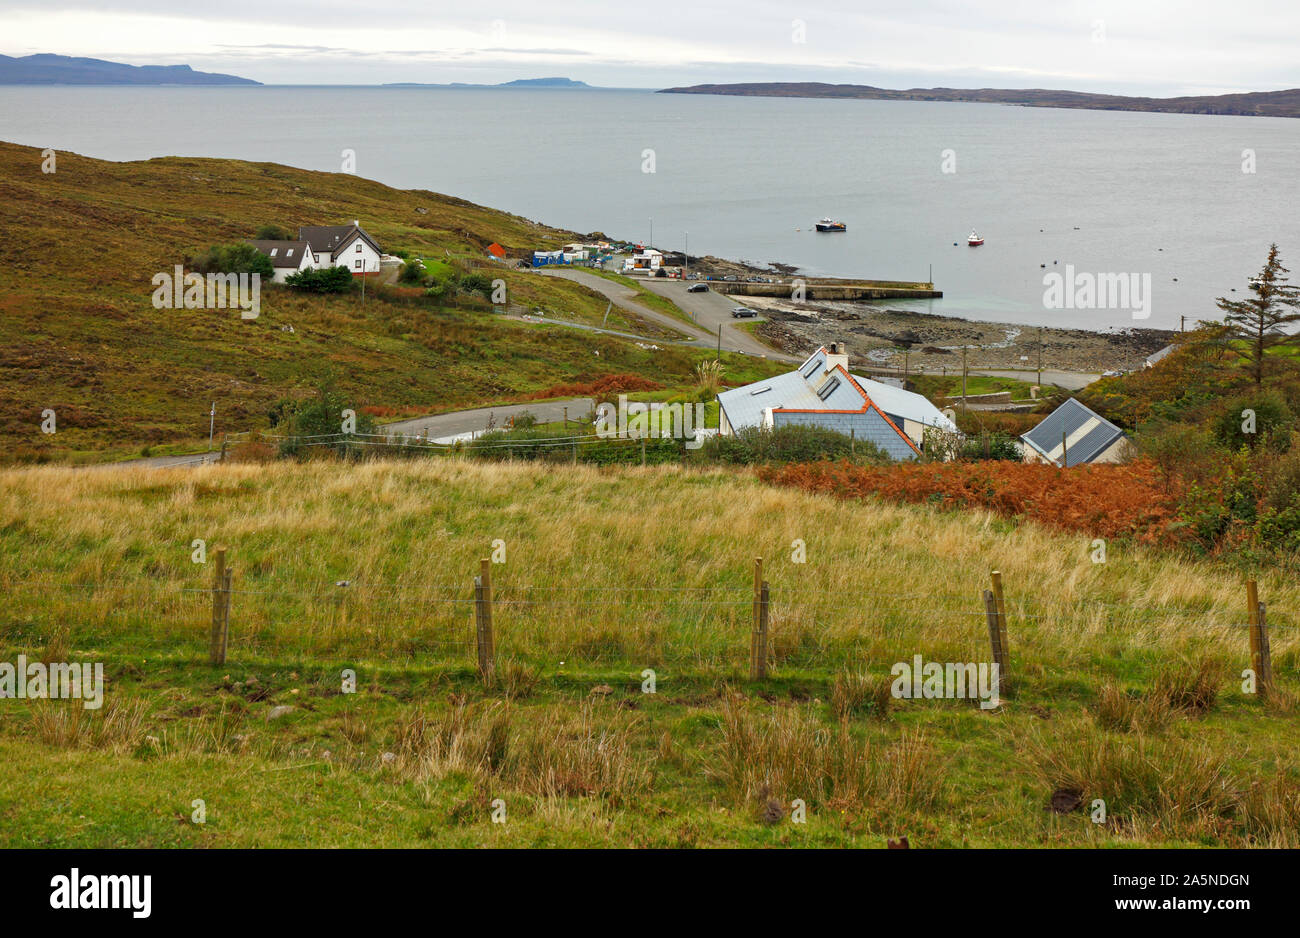 A view of the fishing and crofting village of Elgol by Loch Scavaig at Strathaird, Isle of Skye, Scotland, United Kingdom, Europe. Stock Photo